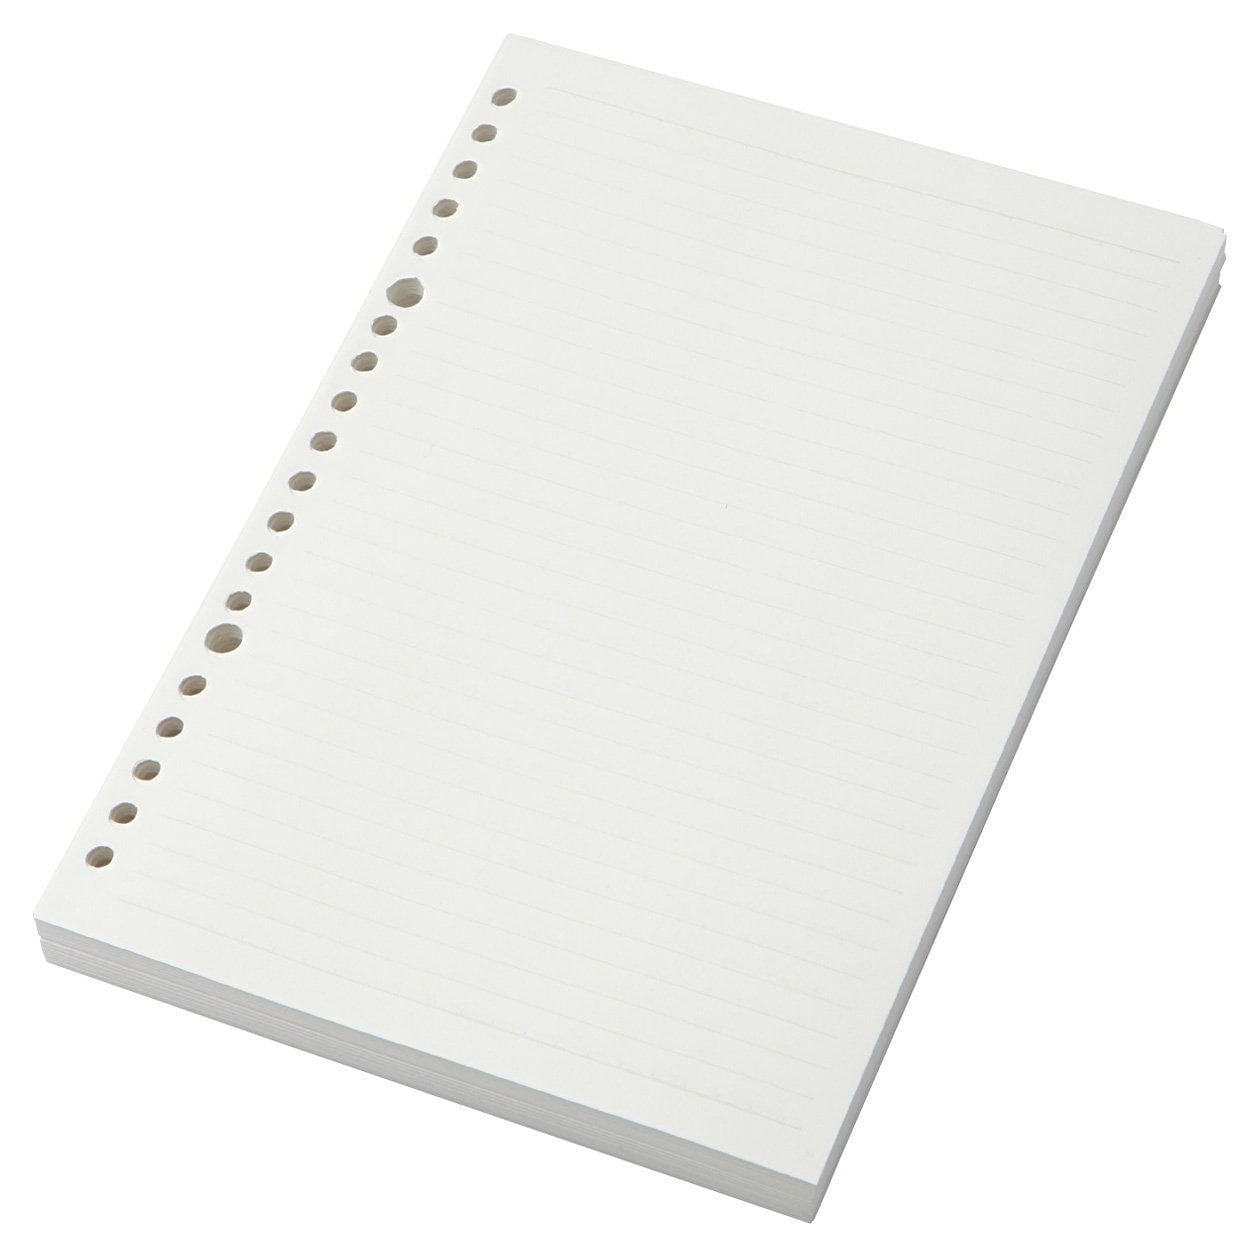 120gsm Loose Leaf Bright White A4 Plain Paper 120gsm A4 Unpunched